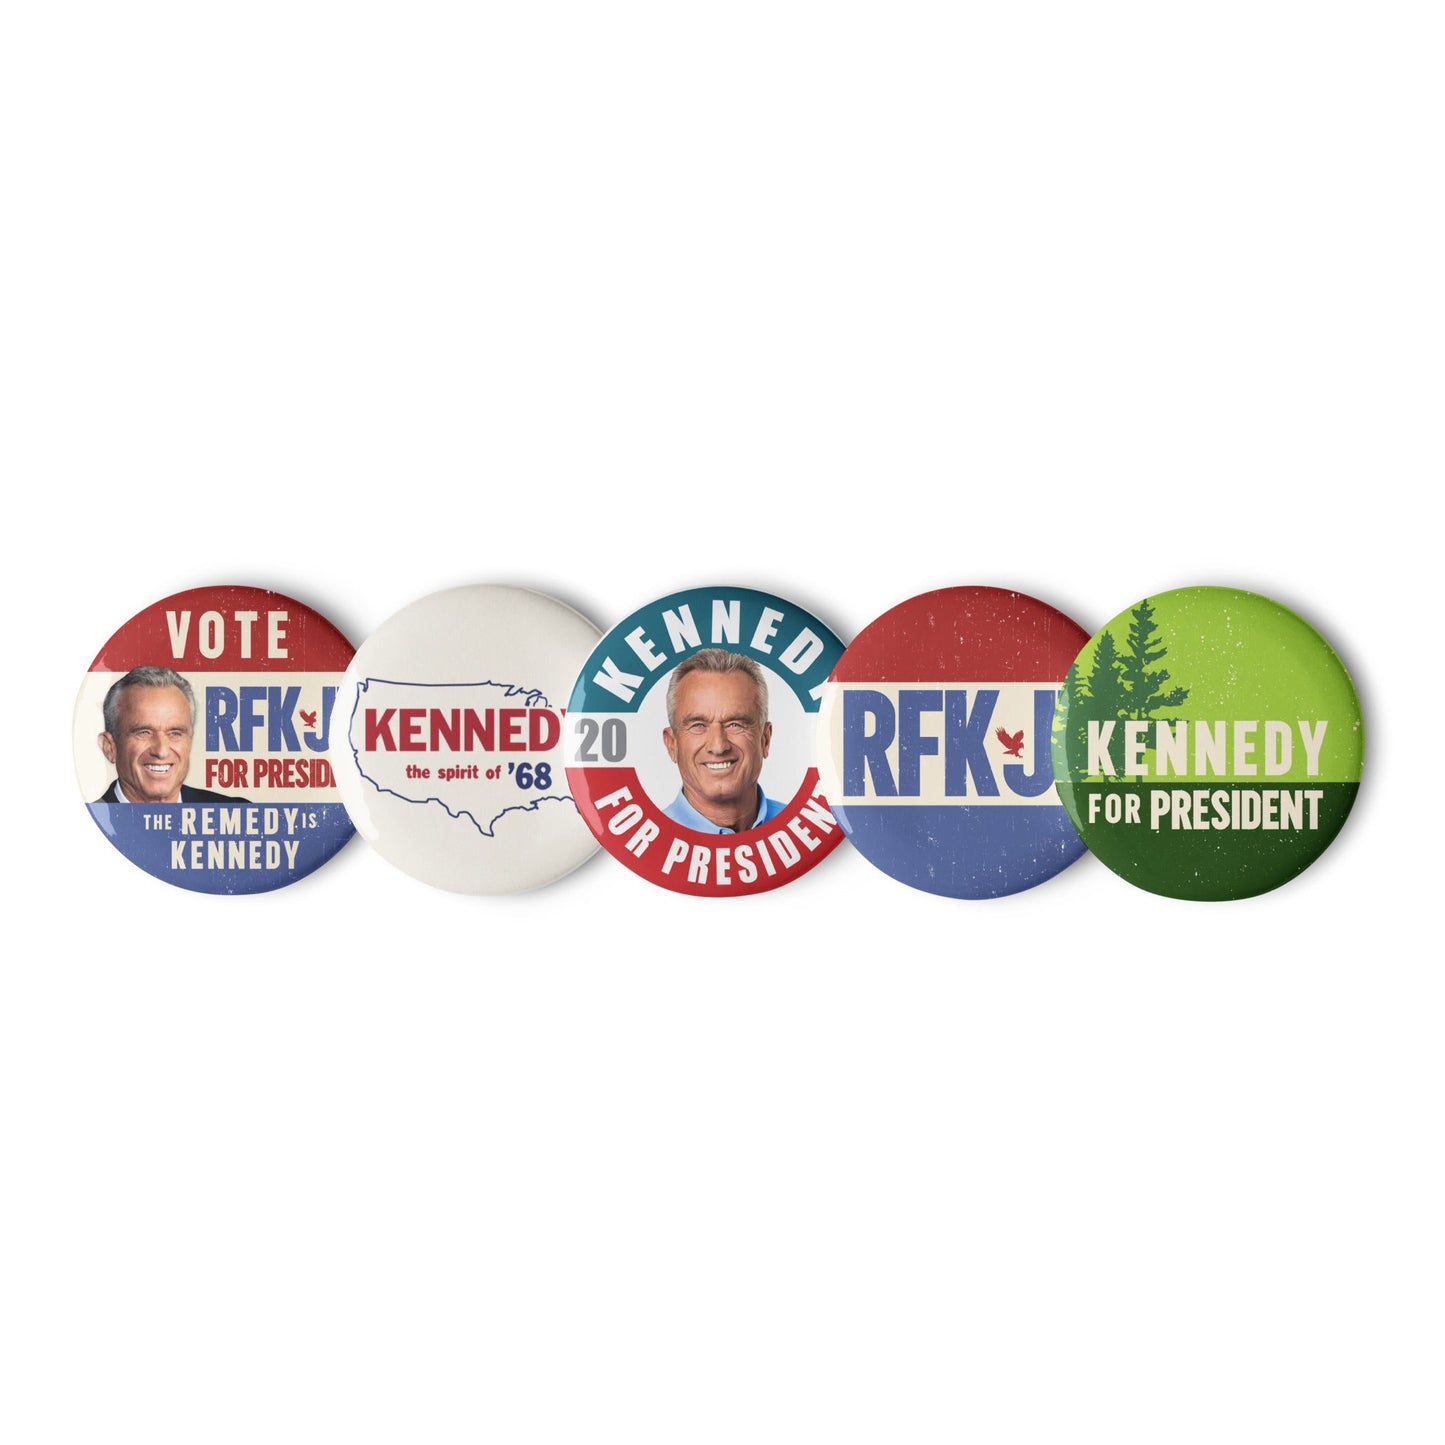 Vintage Pack of Kennedy Buttons - TEAM KENNEDY. All rights reserved